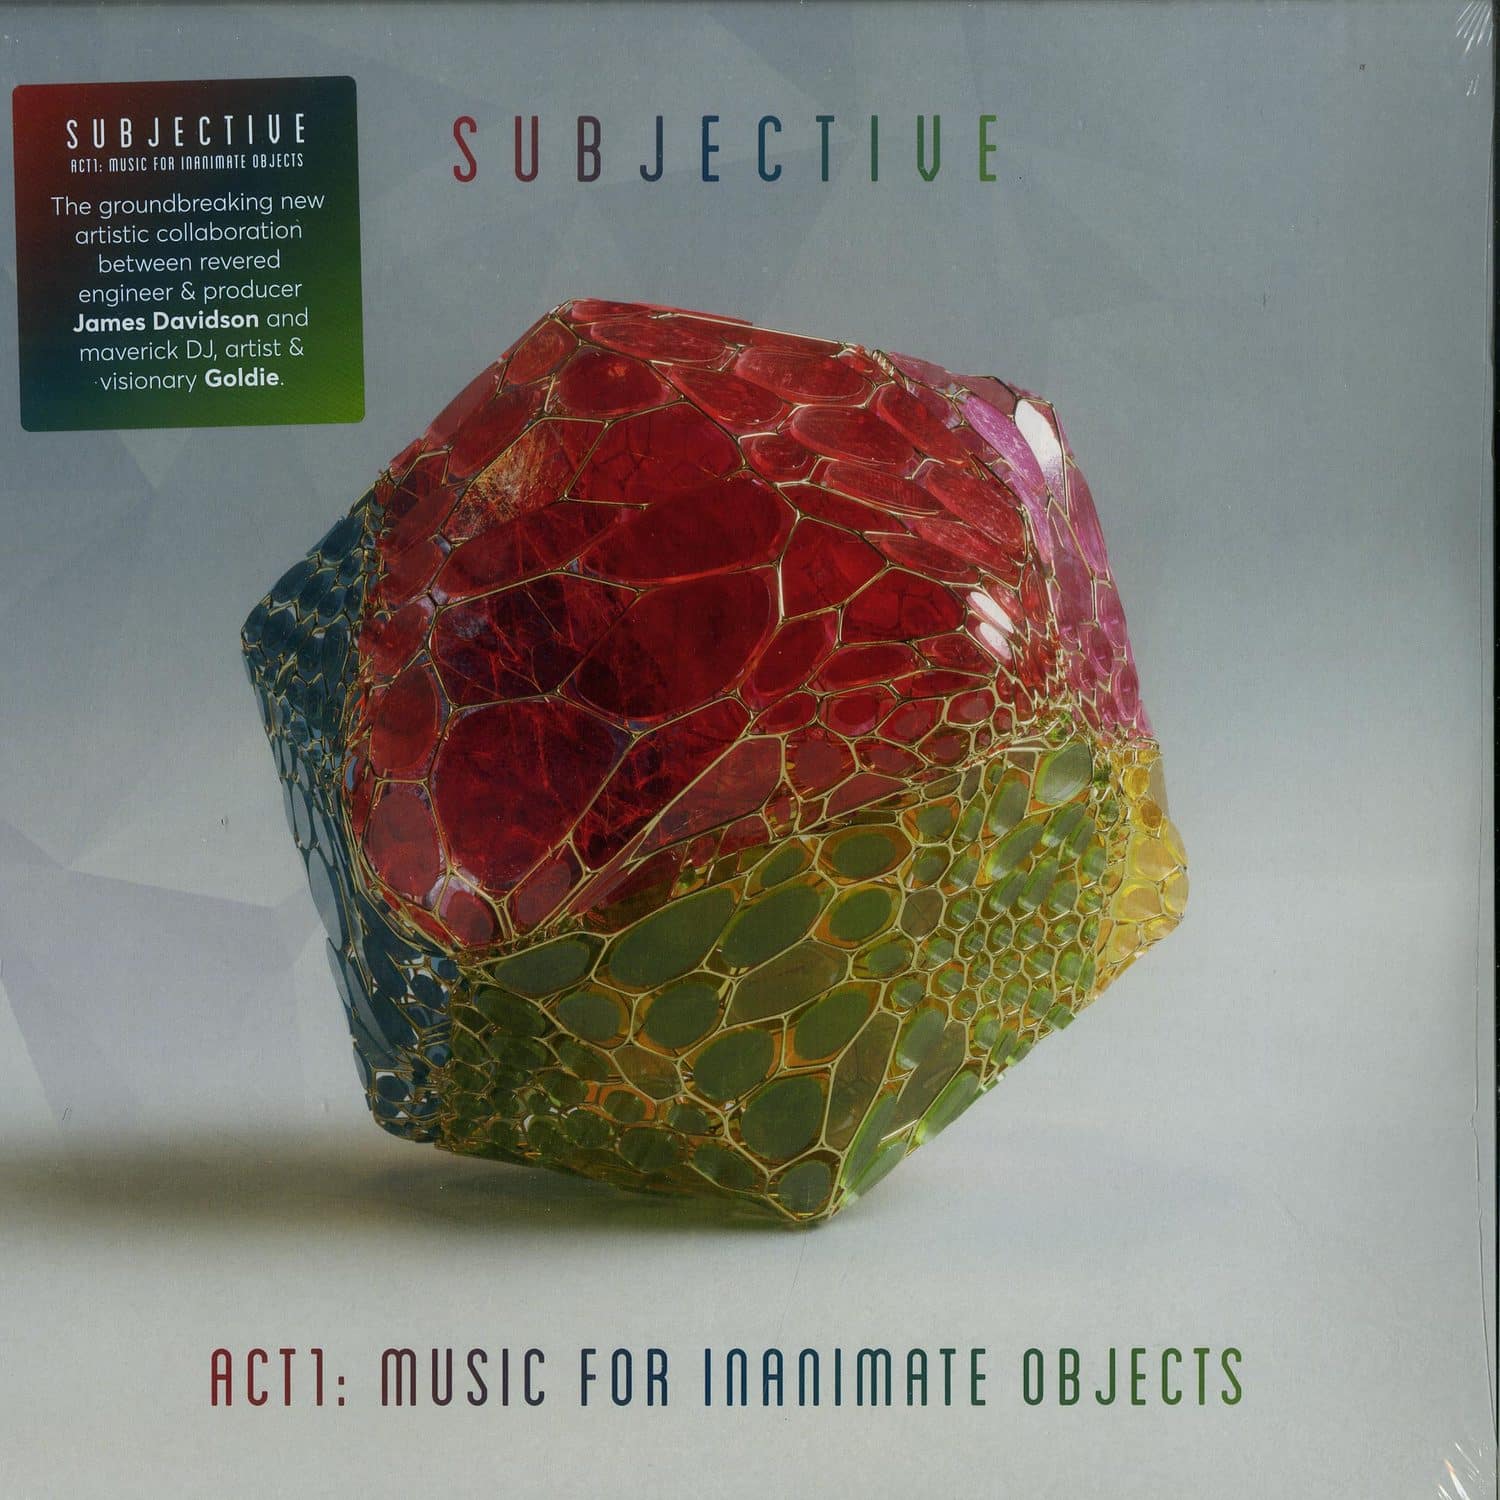 Subjective - ACT ONE: MUSIC FOR INANIMATE OBJECTS 